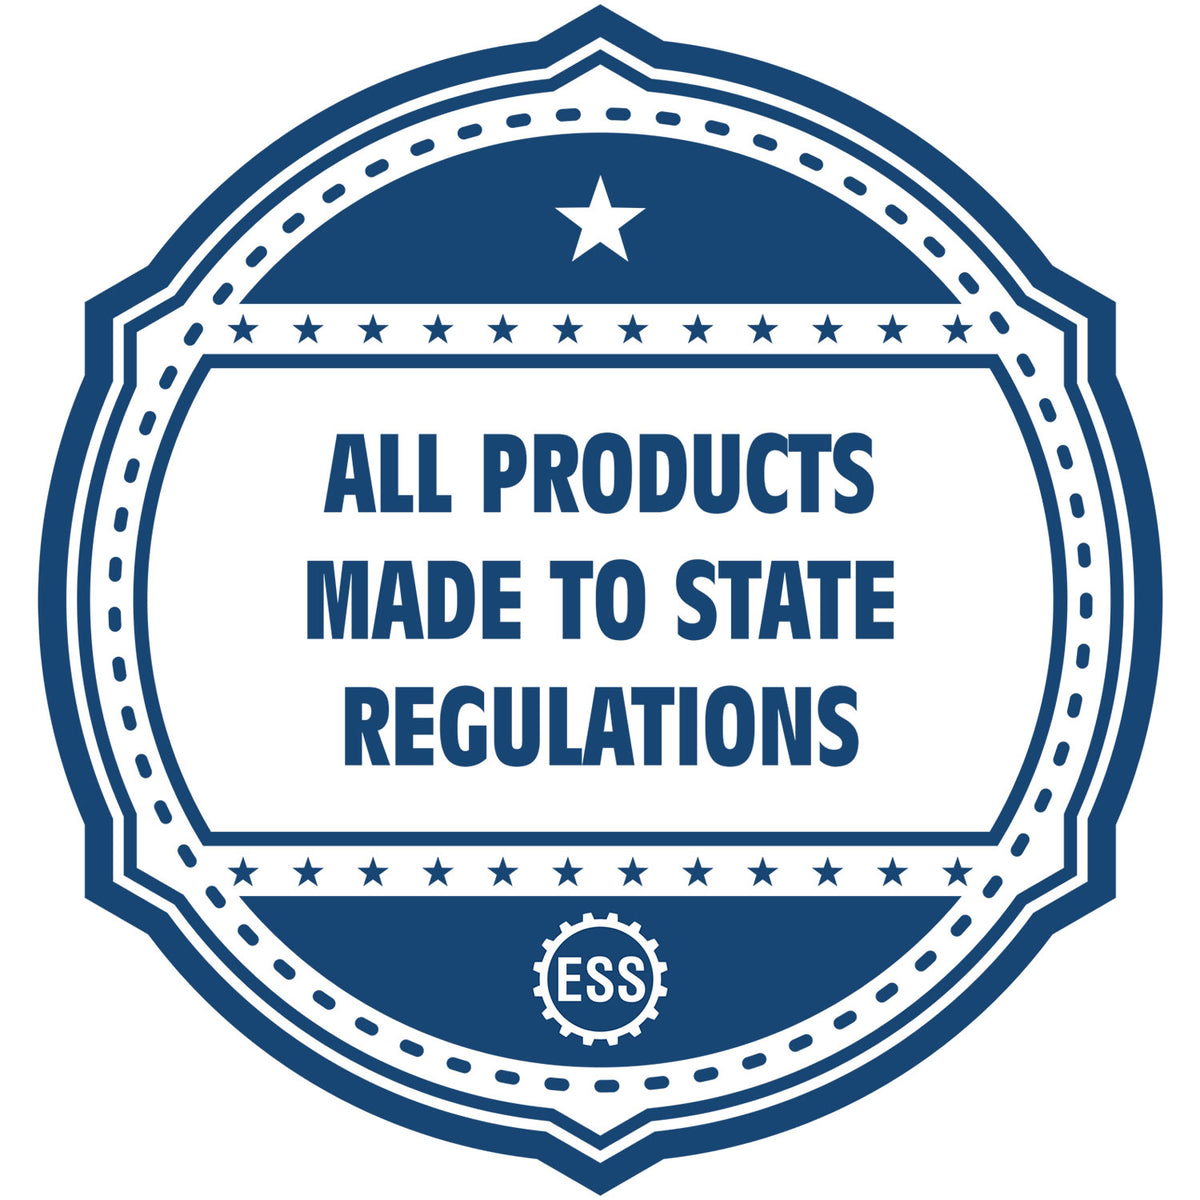 An icon or badge element for the Slim Pre-Inked New York Landscape Architect Seal Stamp showing that this product is made in compliance with state regulations.